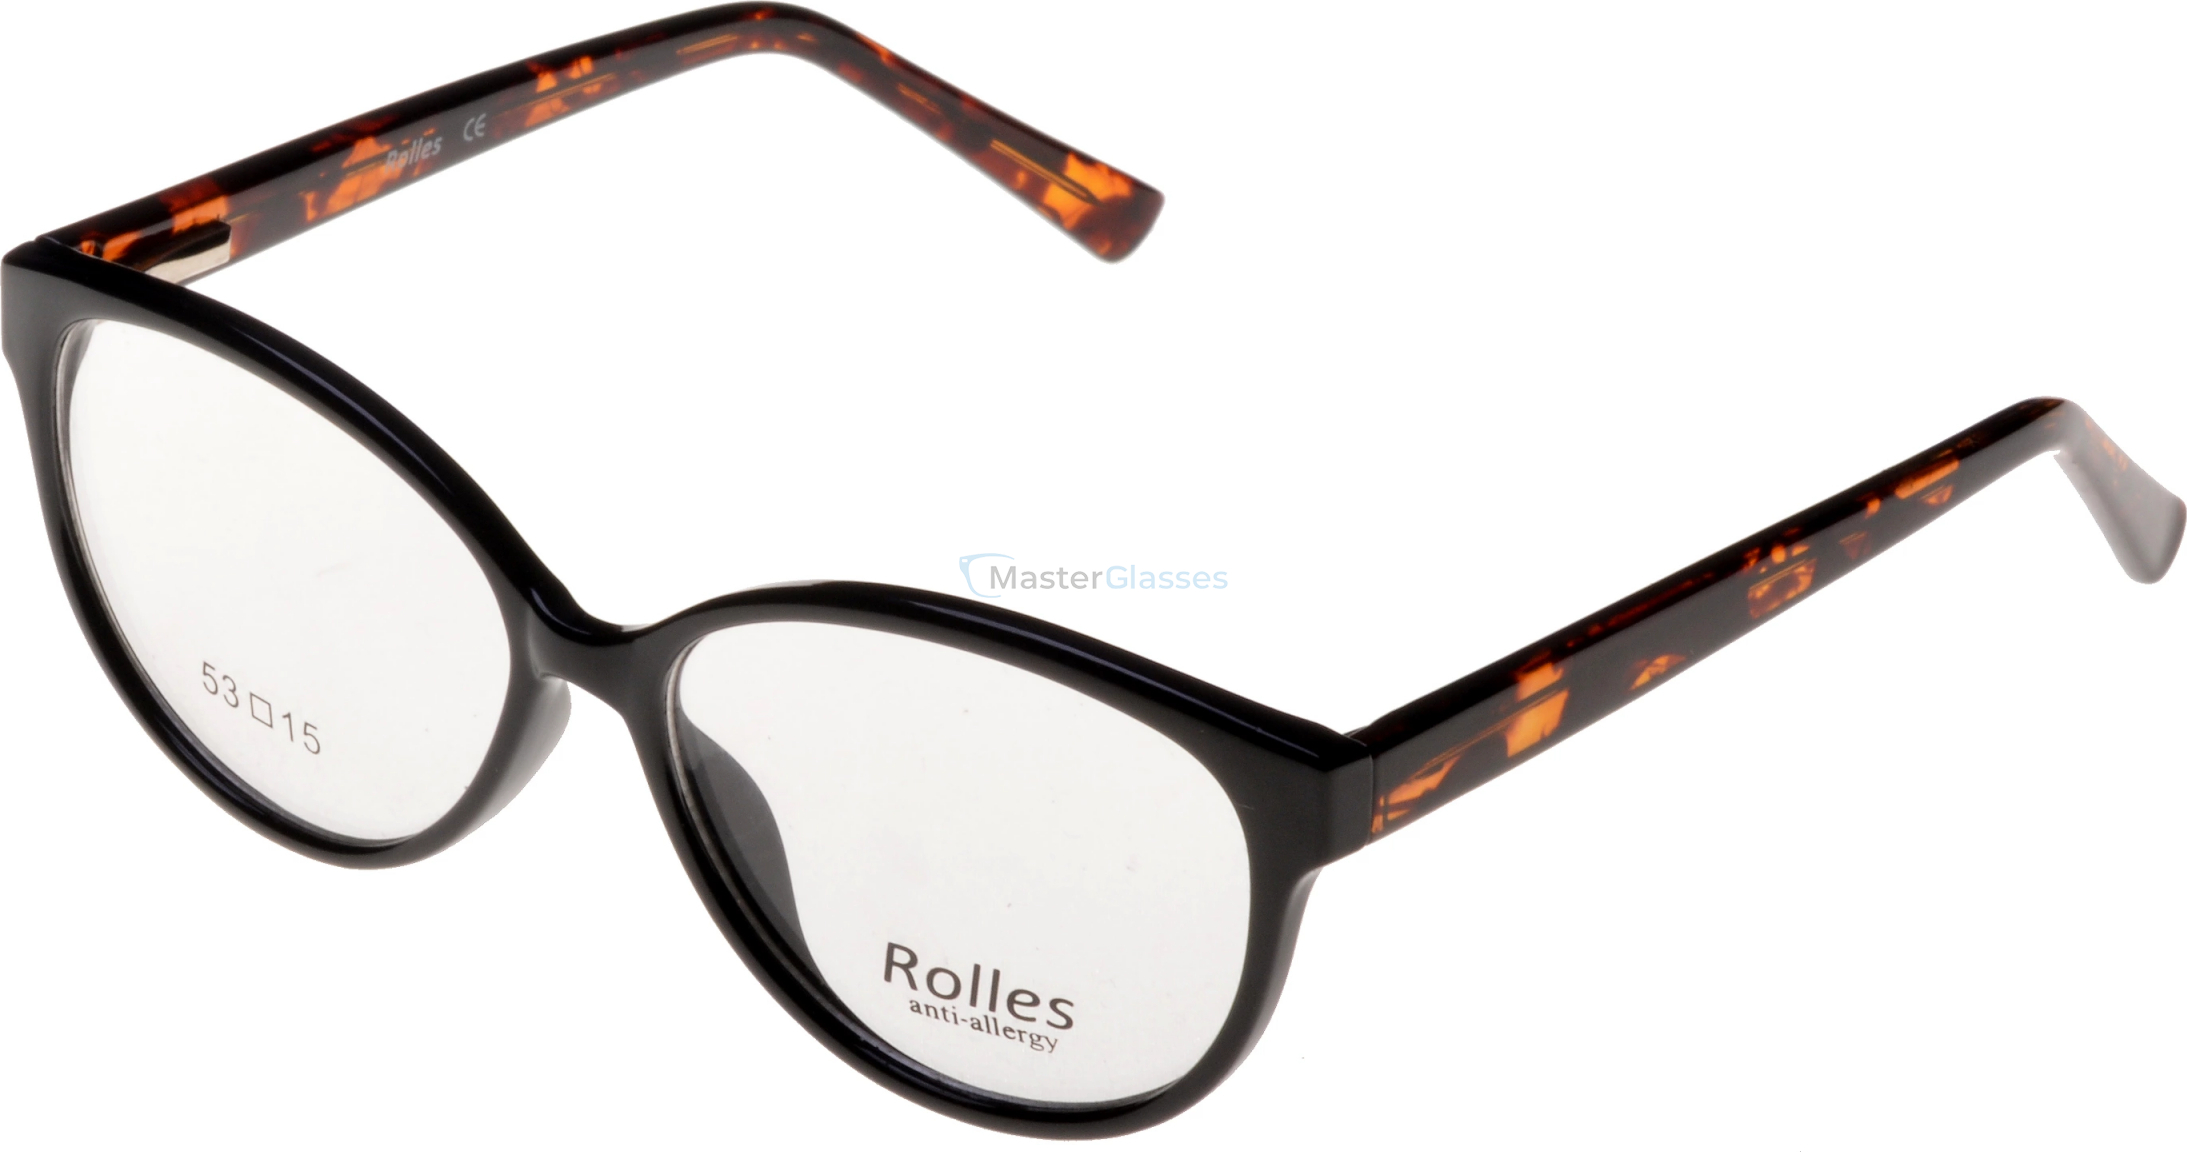  Rolles 534 02